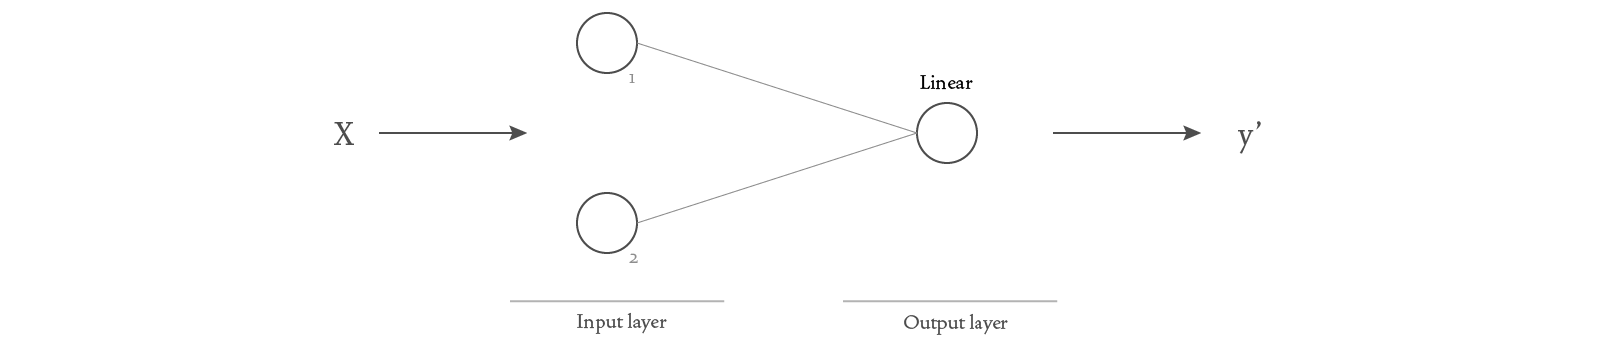 Diagram of a basic neural network.